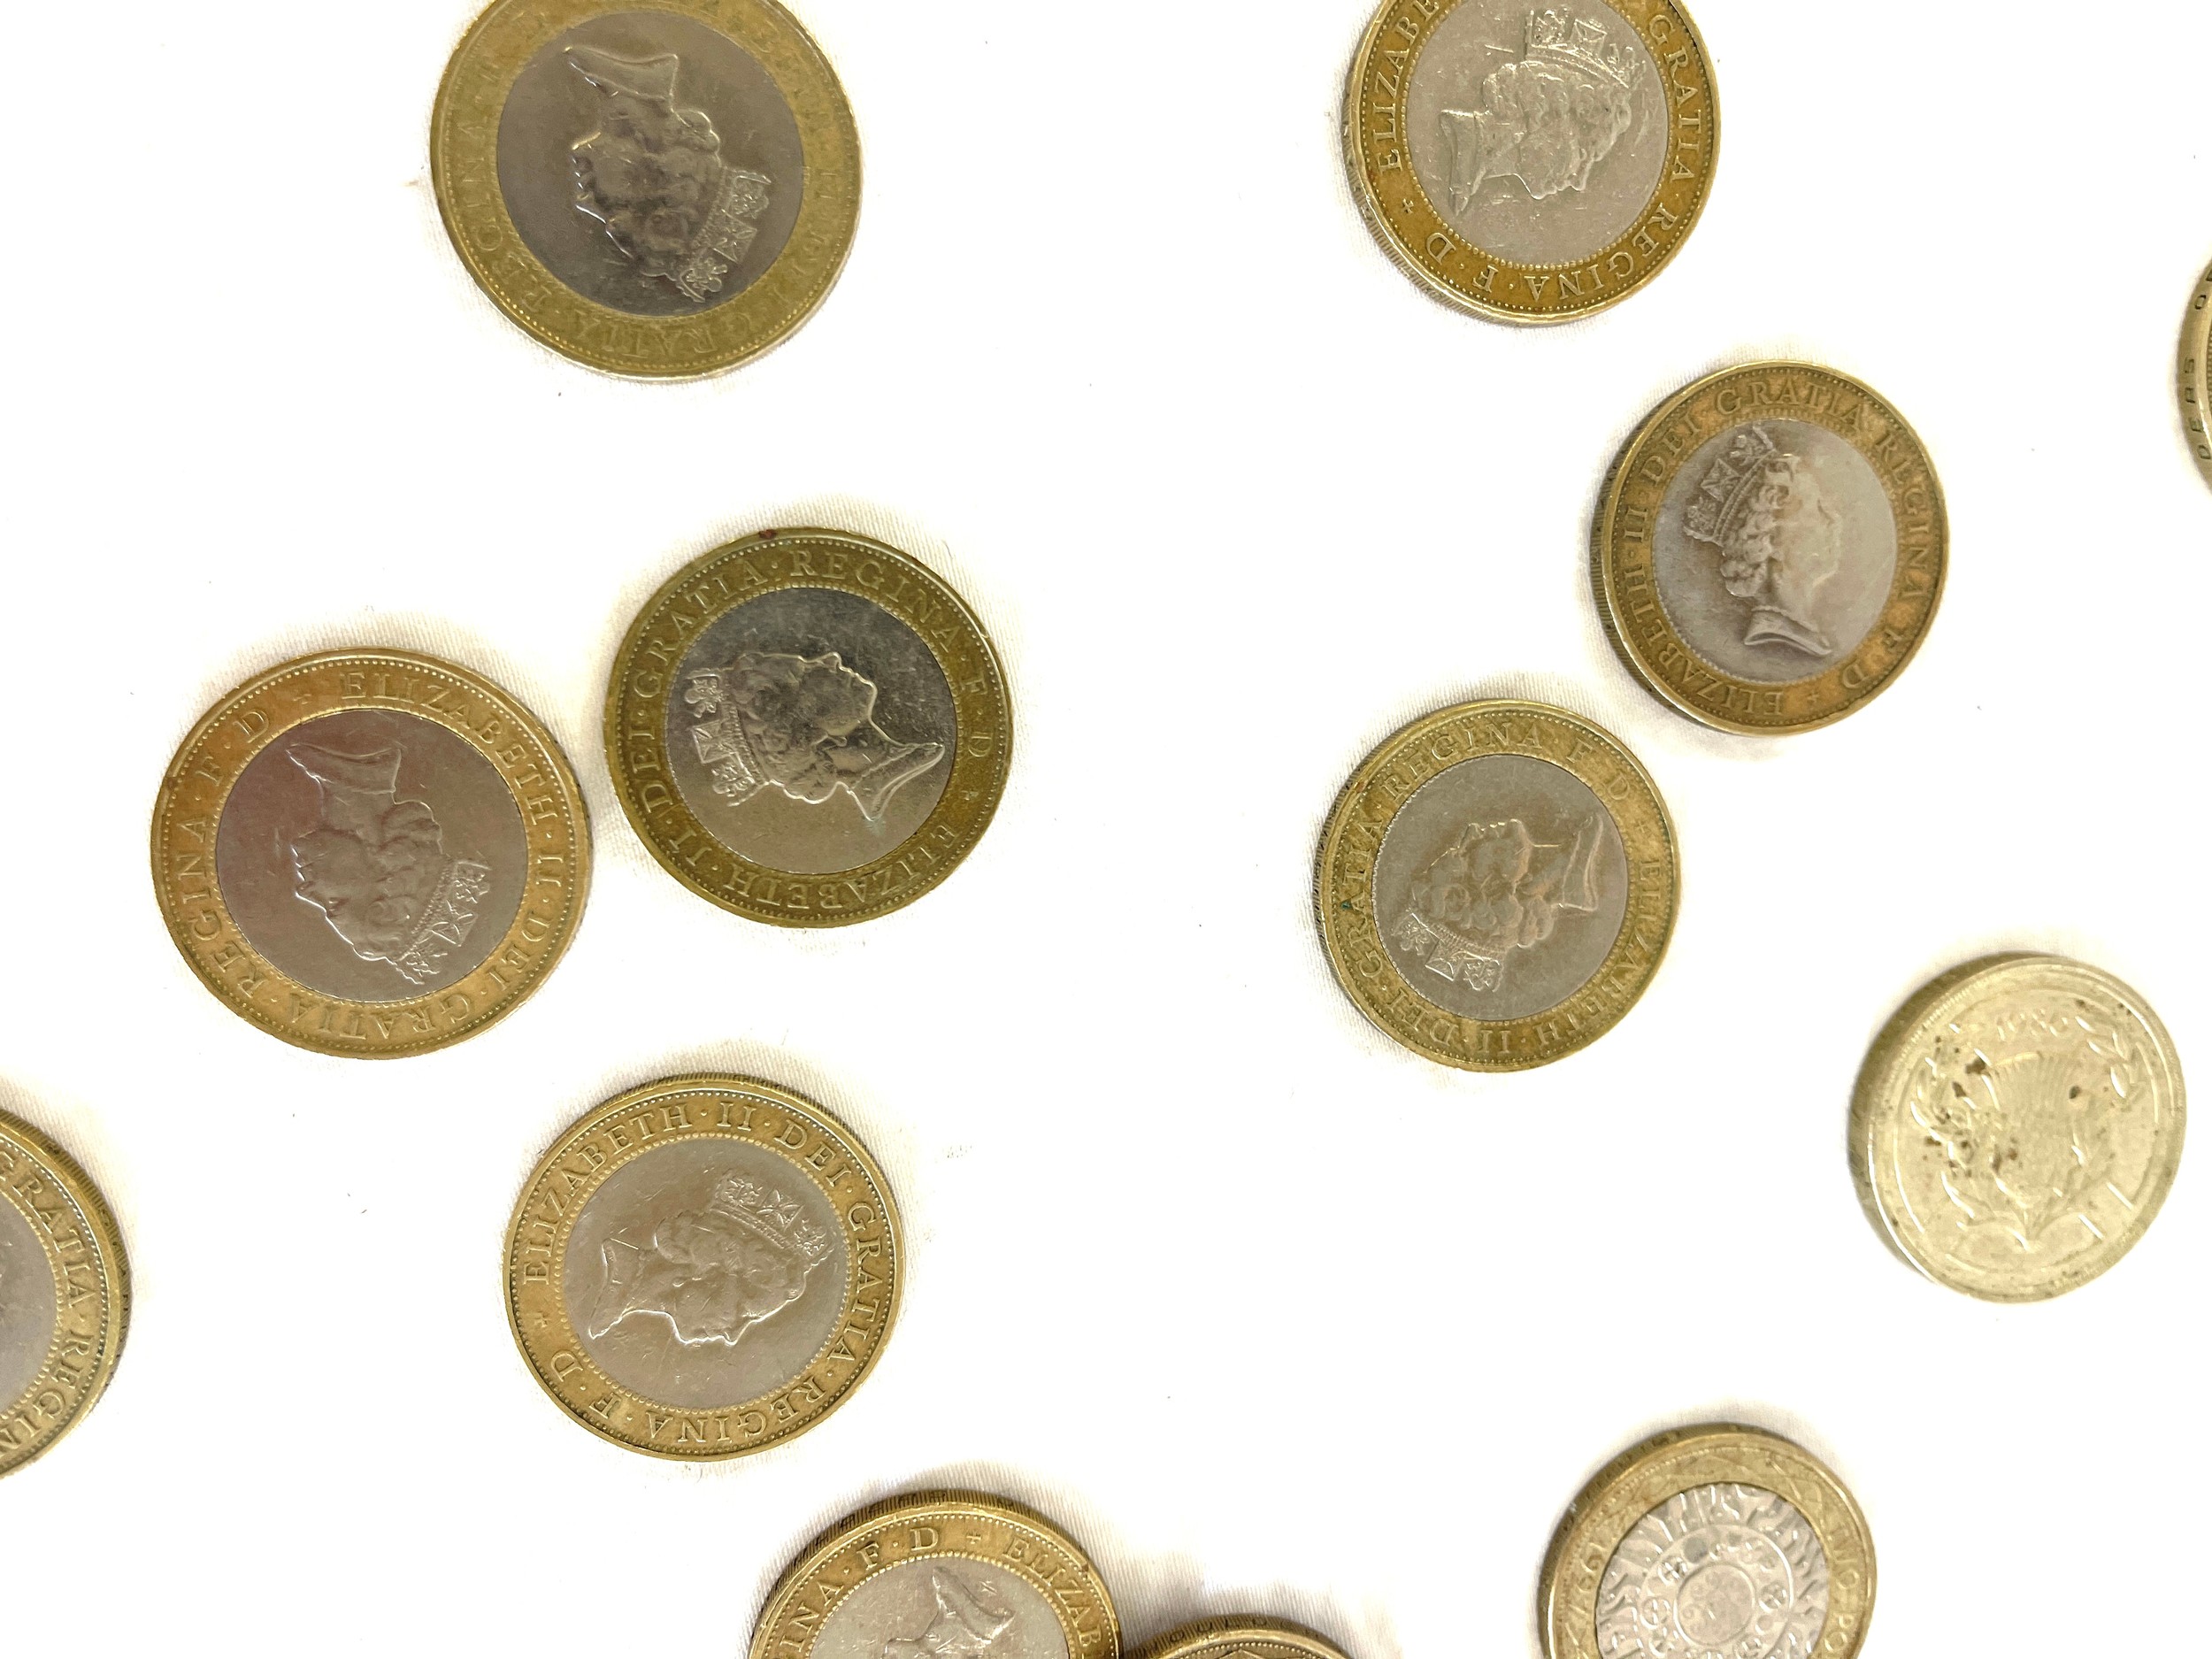 Large selection of 1997 2 pound coins - Queen wearing a necklace - Image 3 of 6